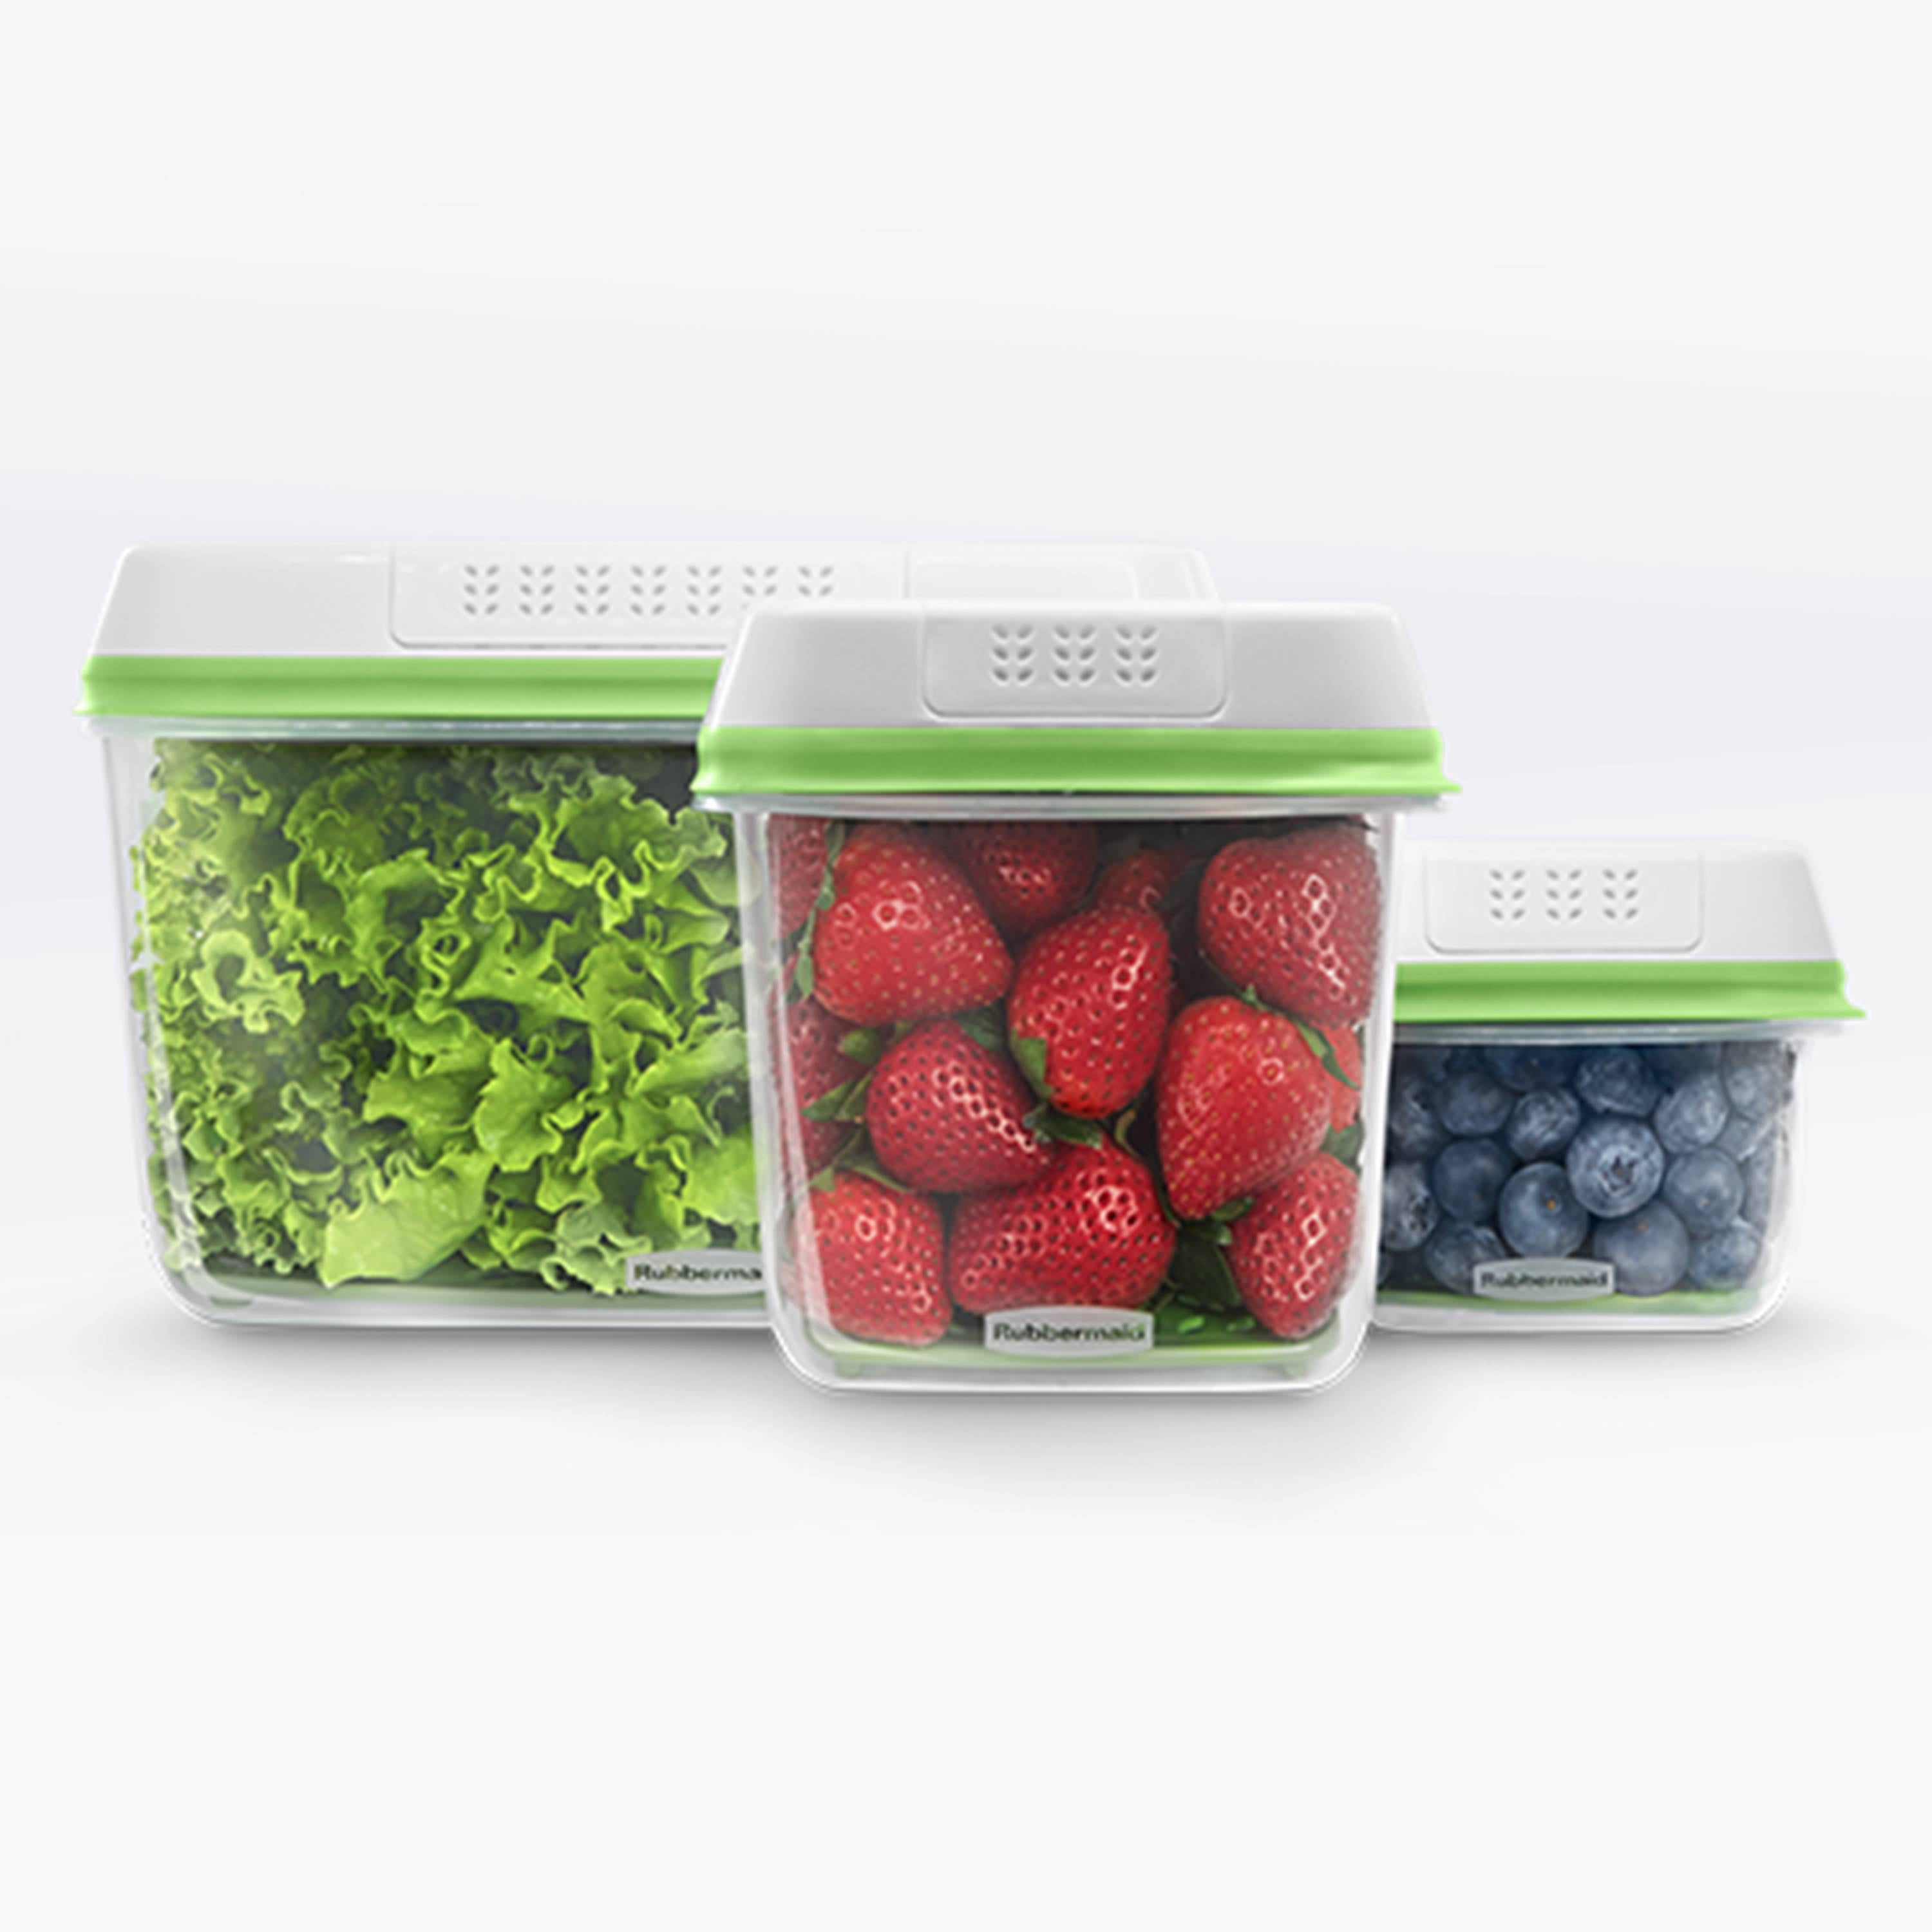  Rubbermaid Produce Food Storage, 6.3 Cup, Green: Home & Kitchen